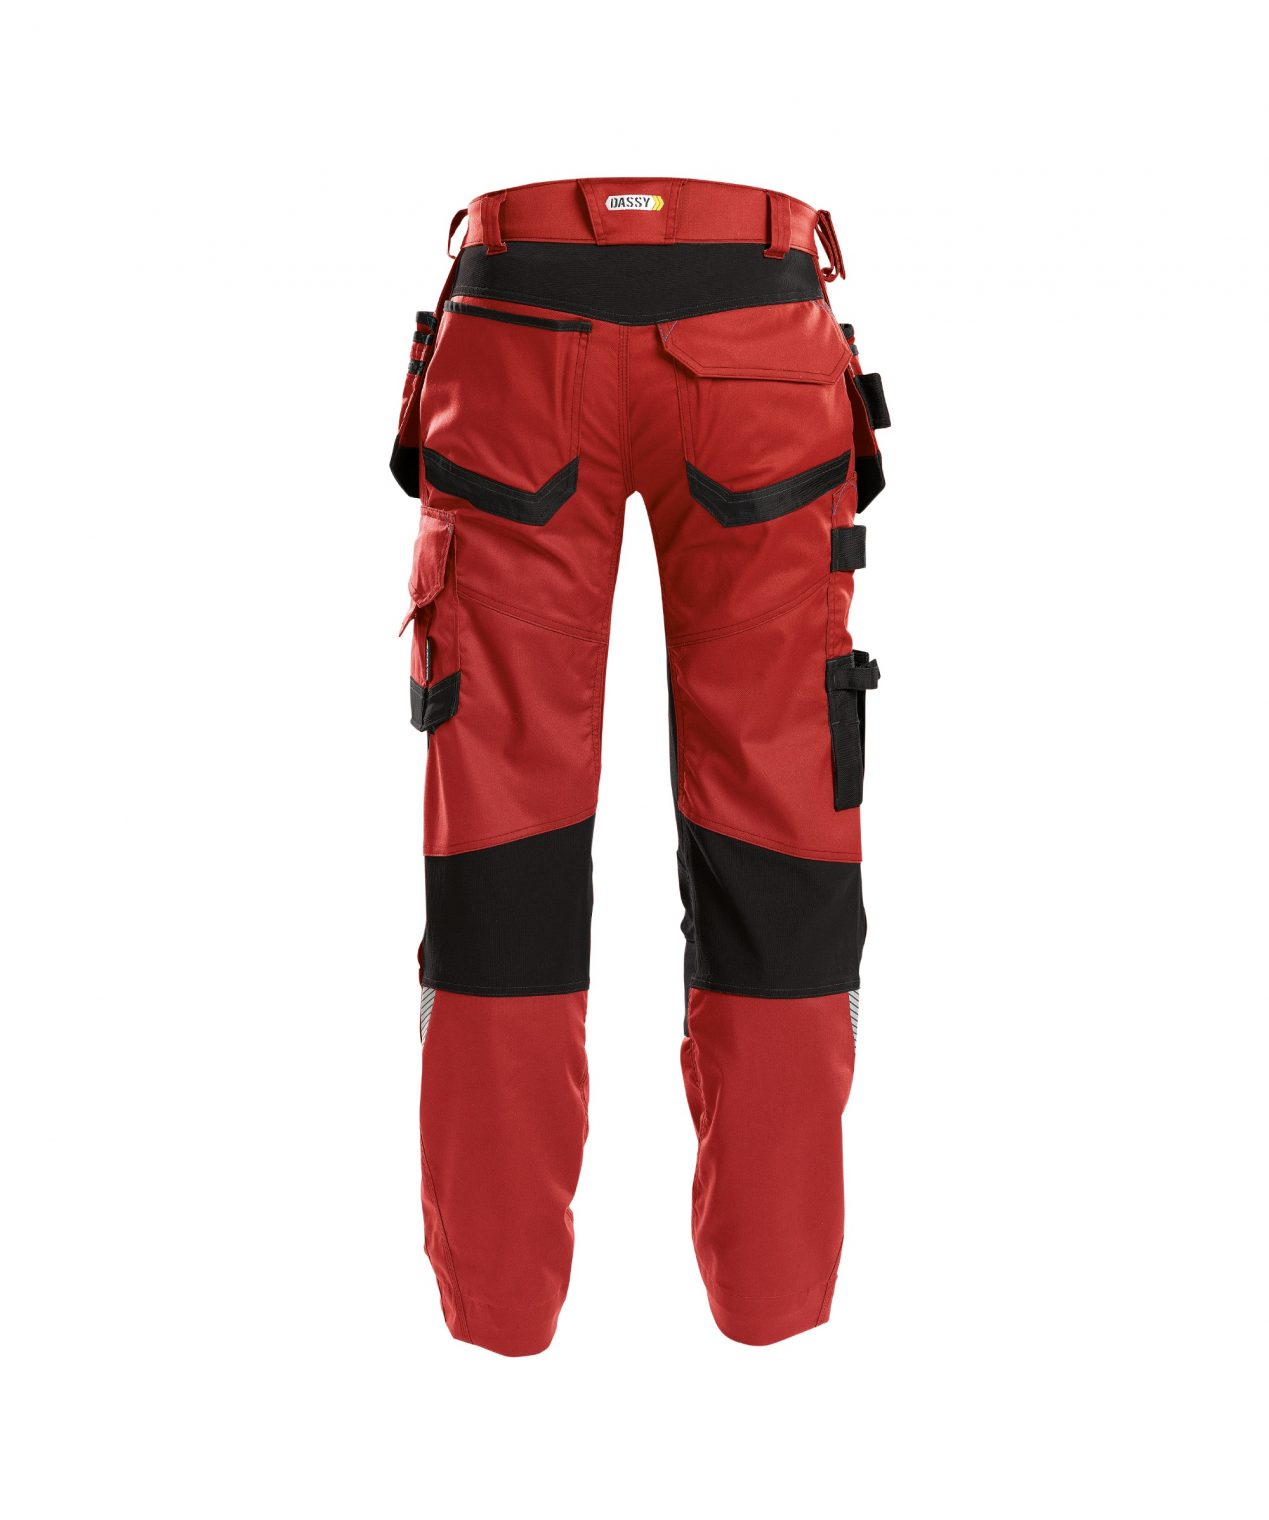 flux trousers with stretch holster and knee pockets red black back